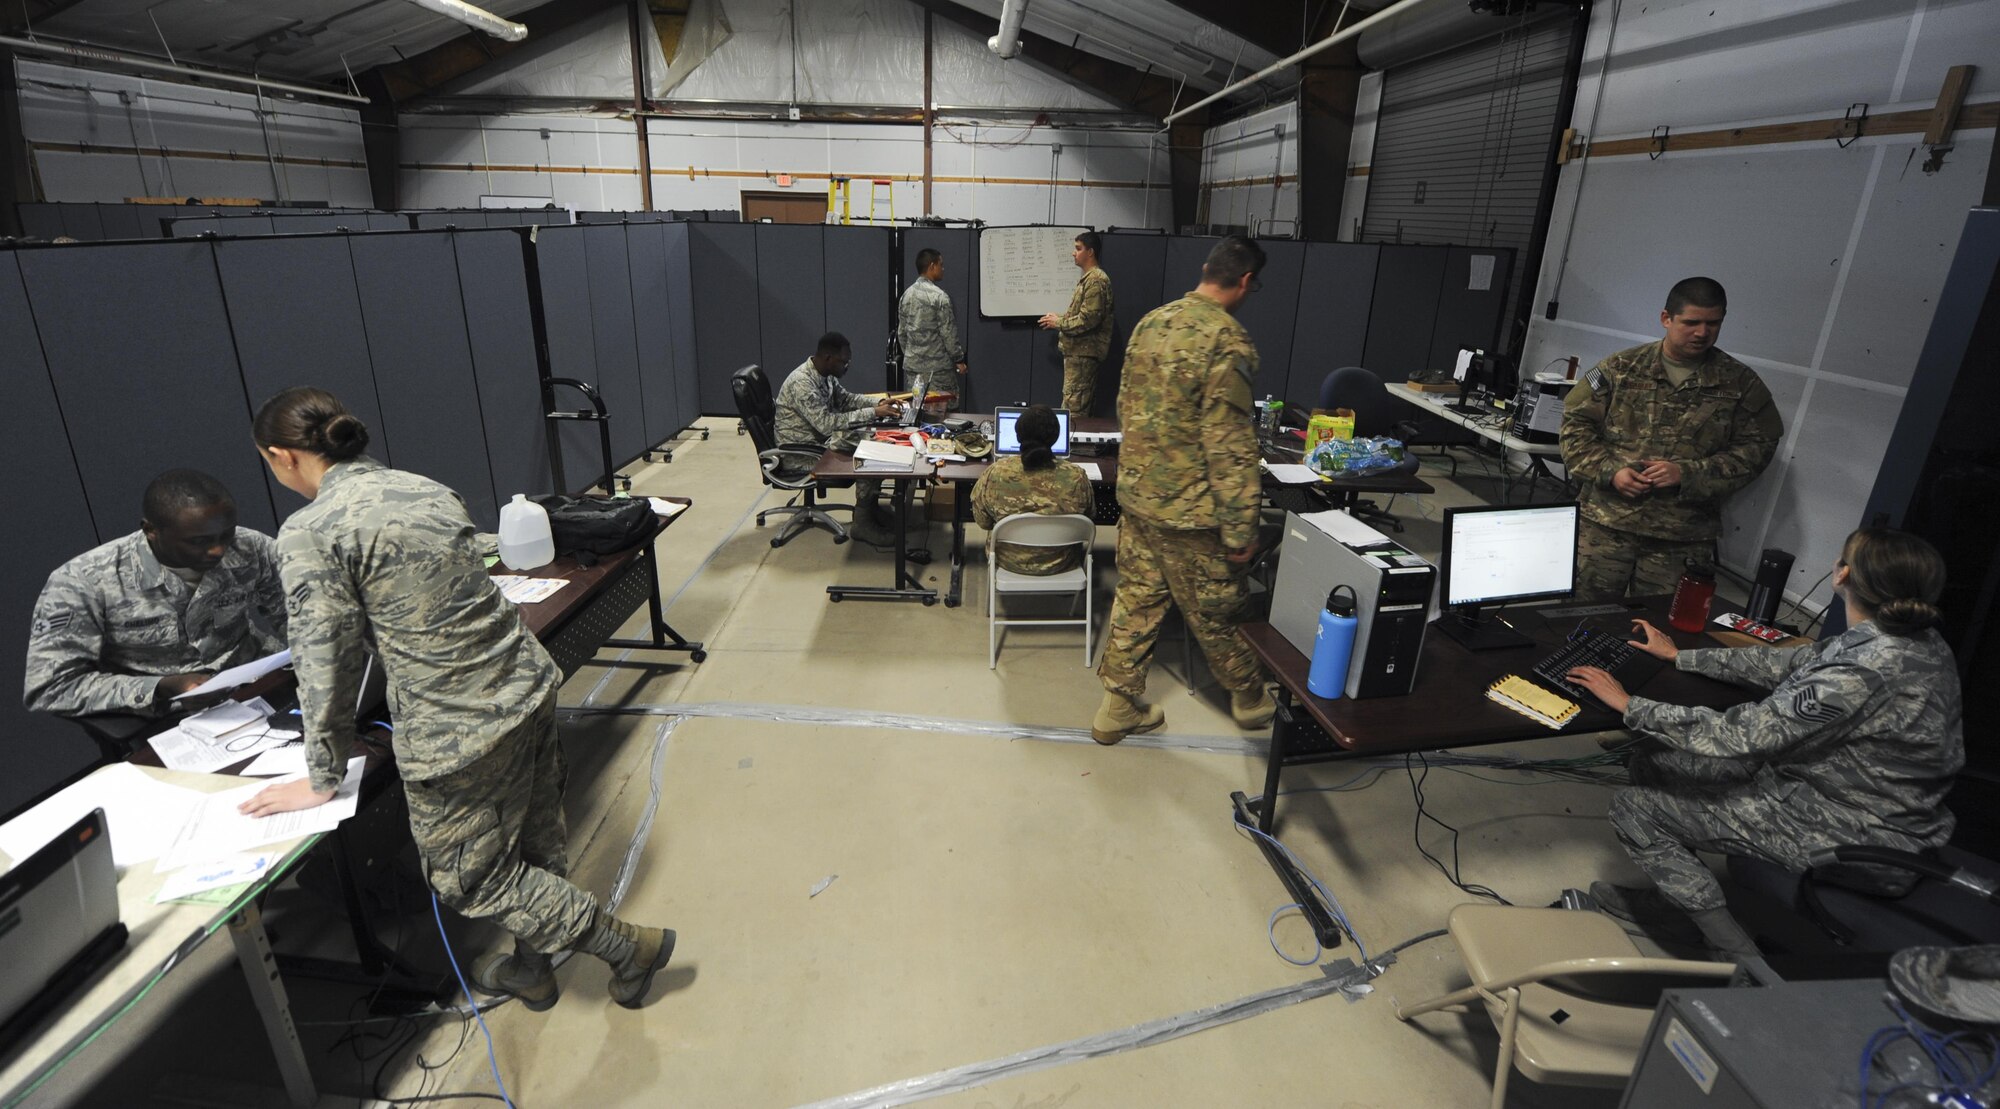 Air Commandos perform critical tasks during an exercise at Hurlburt Field, Fla., Feb. 2, 2017. The Joint Contingency Contracting Officer Training Exercise was an exercise used to simulate a deployed environment to increase global vigilance in every mission and every domain. (U.S. Air Force photo by Airman Dennis Spain)